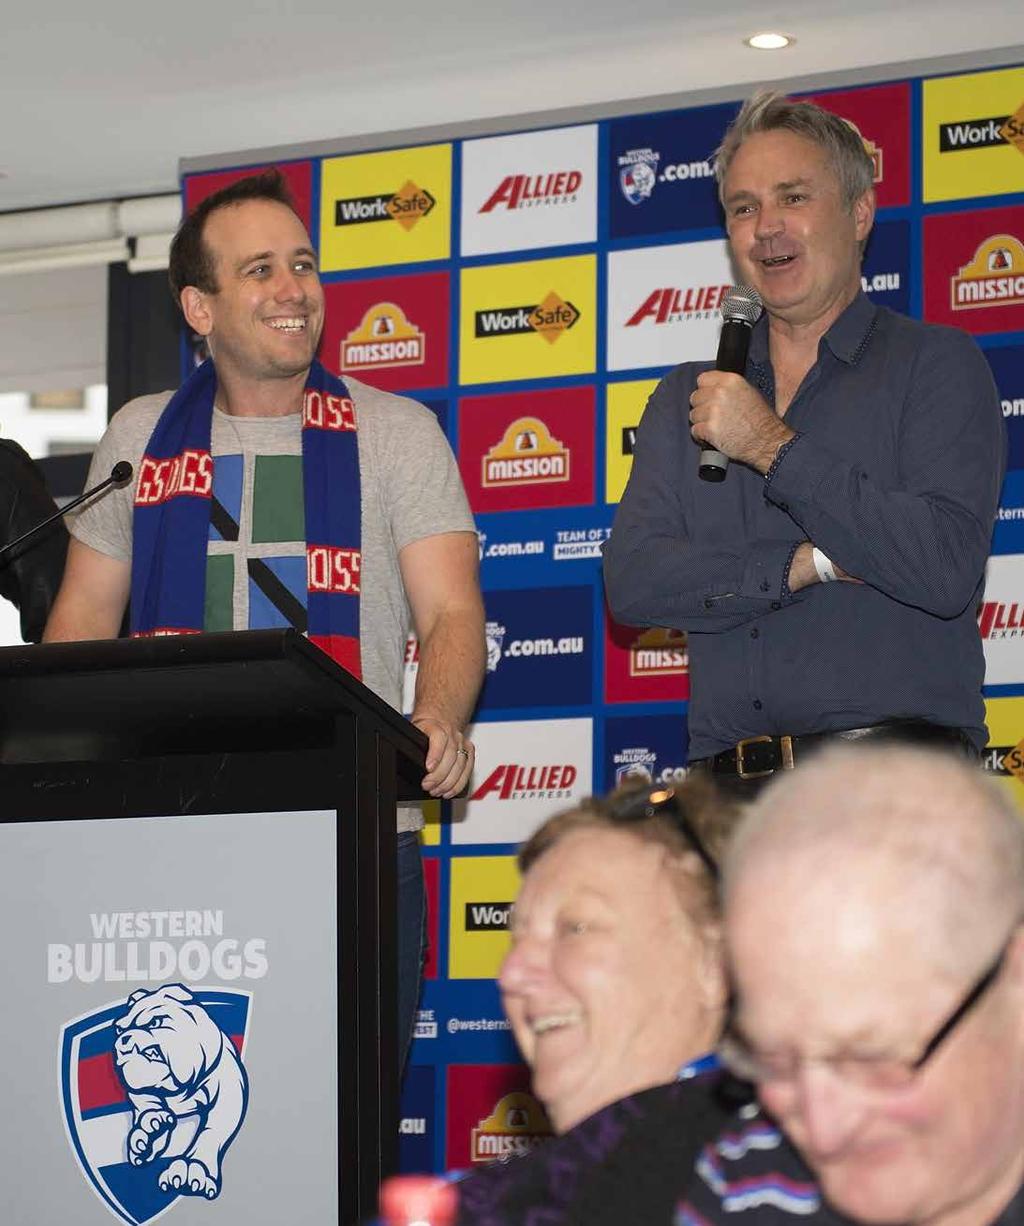 Top Dogs NEW Since 1979 the Top Dogs have been one of our most reputable and passionate supporter groups and for those looking to increase their level of support for the Western Bulldogs, this is a